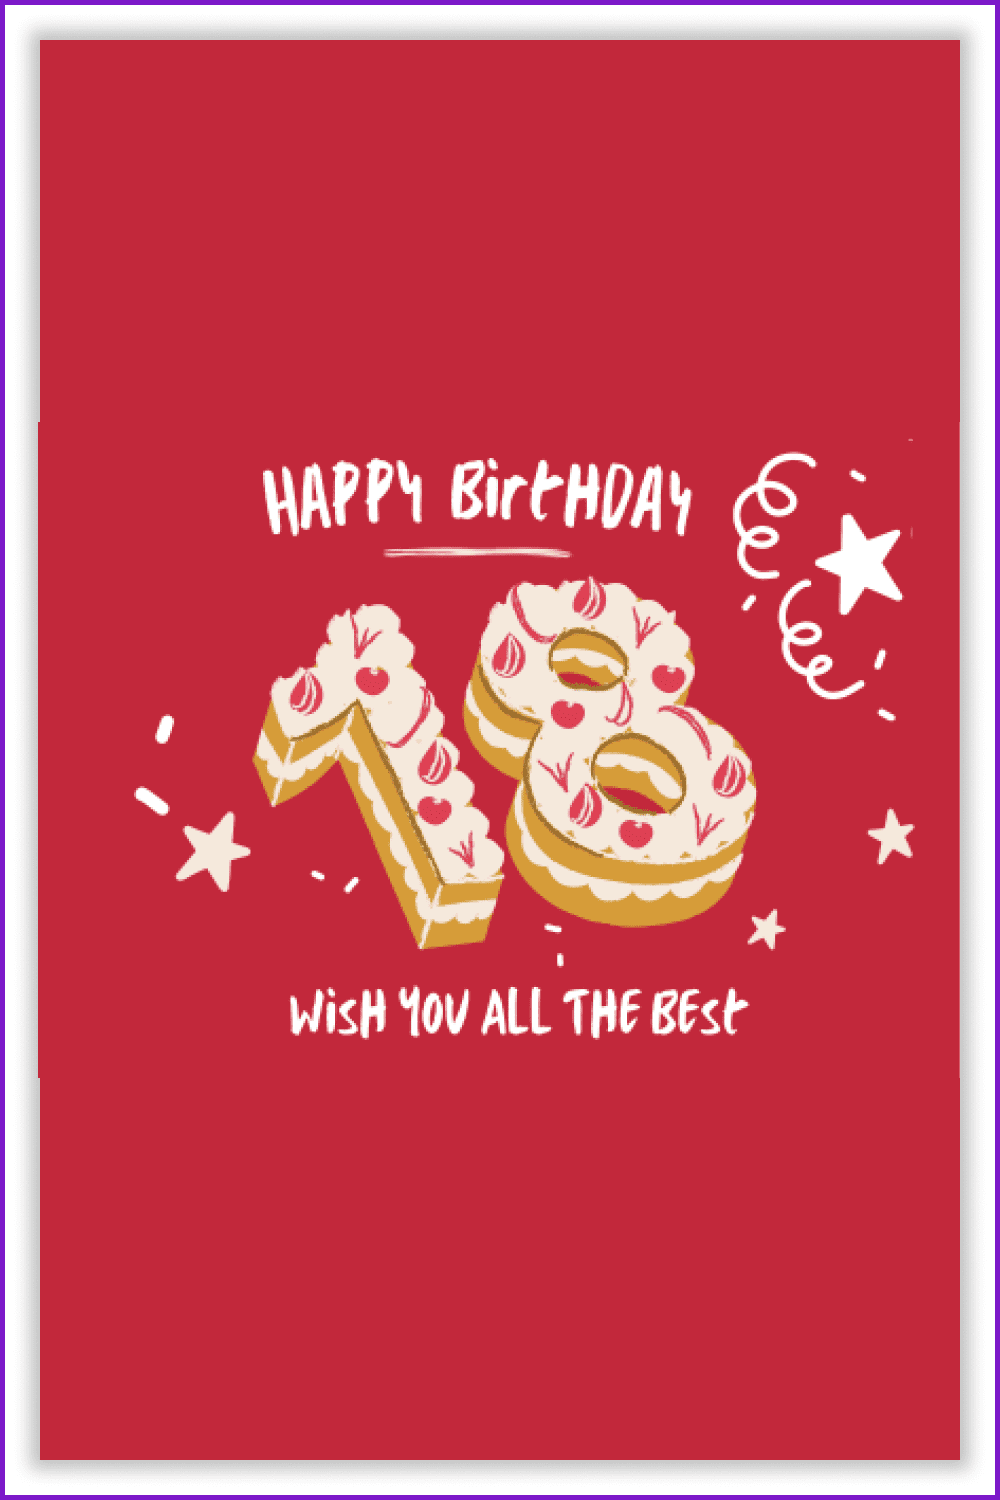 Birthday card with a cake in the form of the number 18 on a red background.